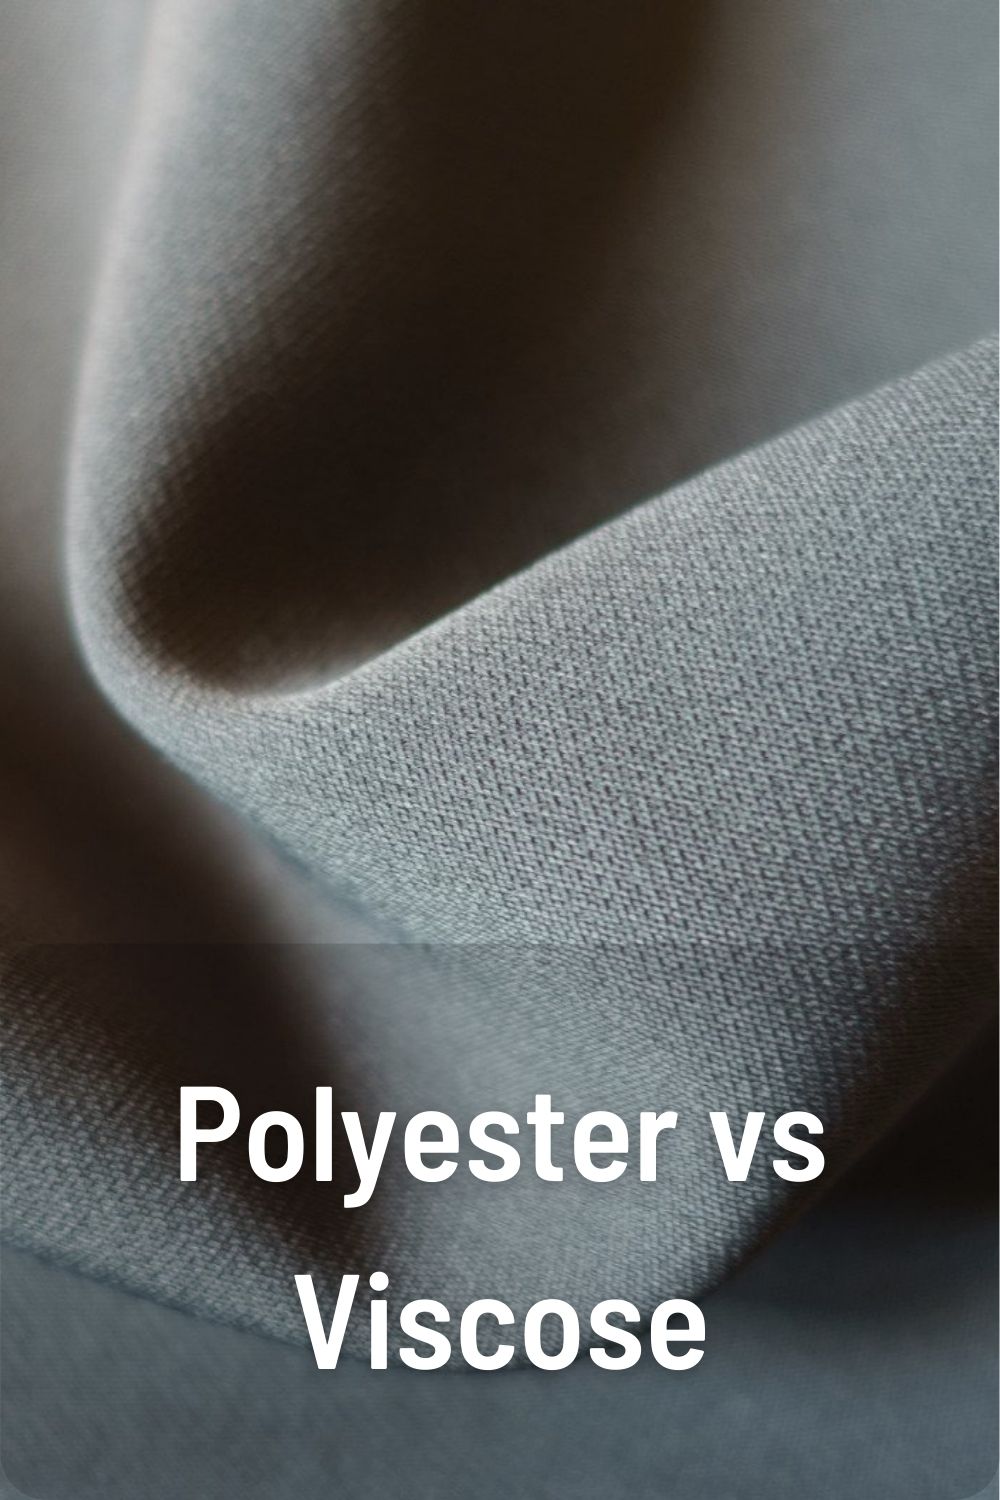 Polyester vs Viscose: Key Differences Between These Fabrics